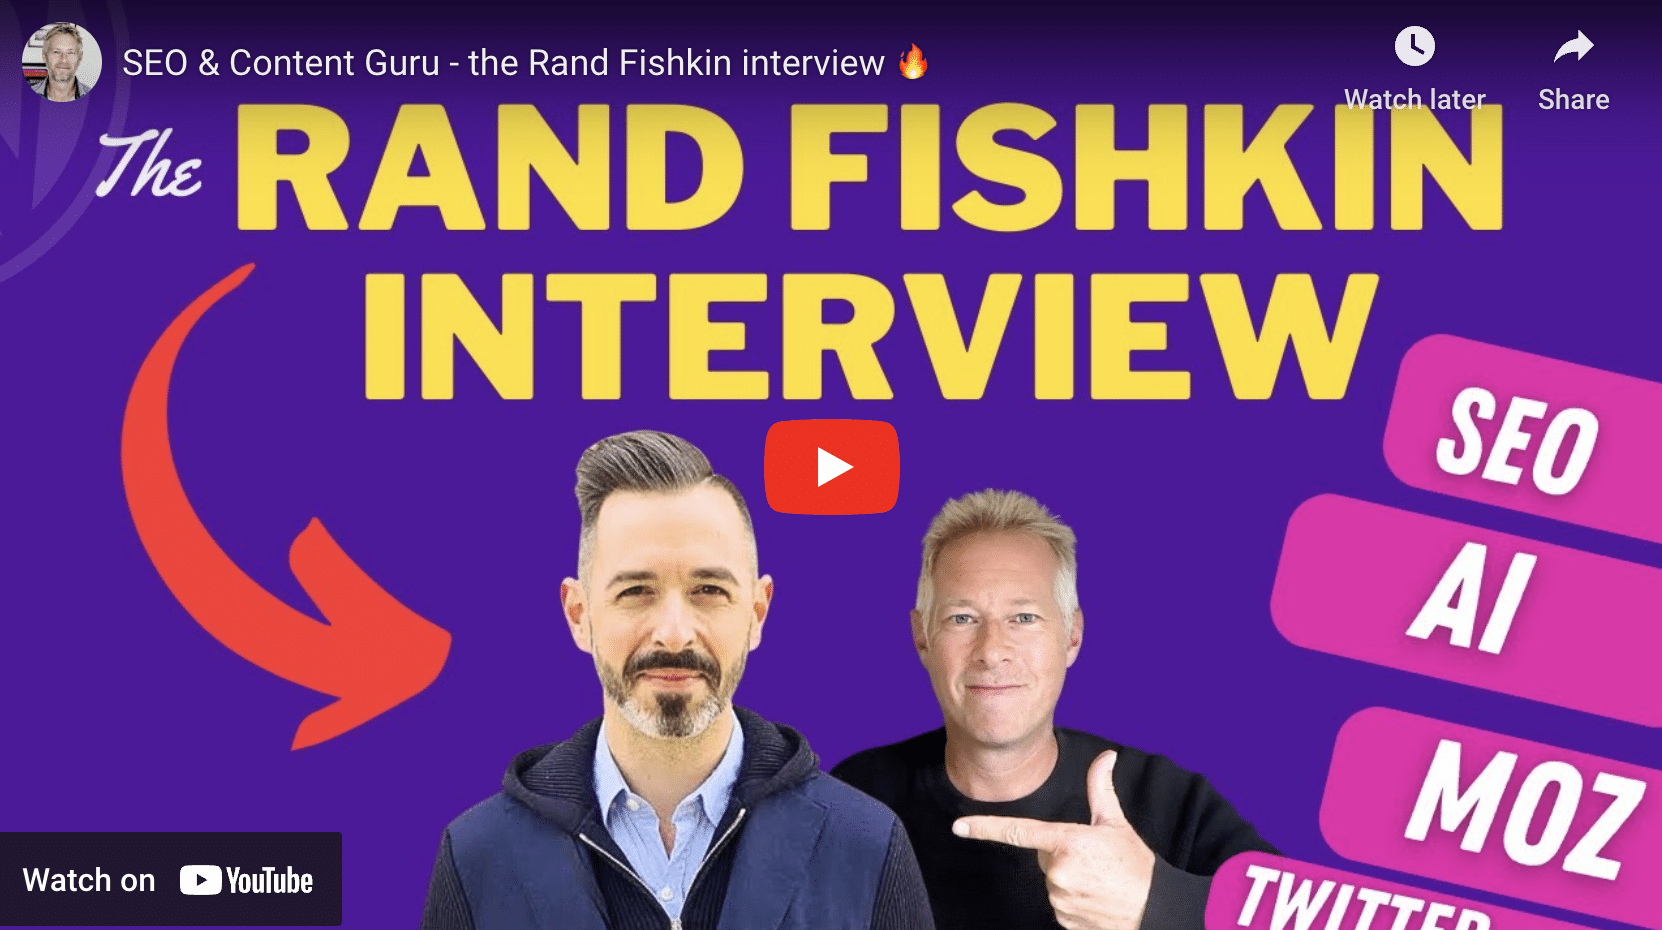 My Interview with Rand Fishkin